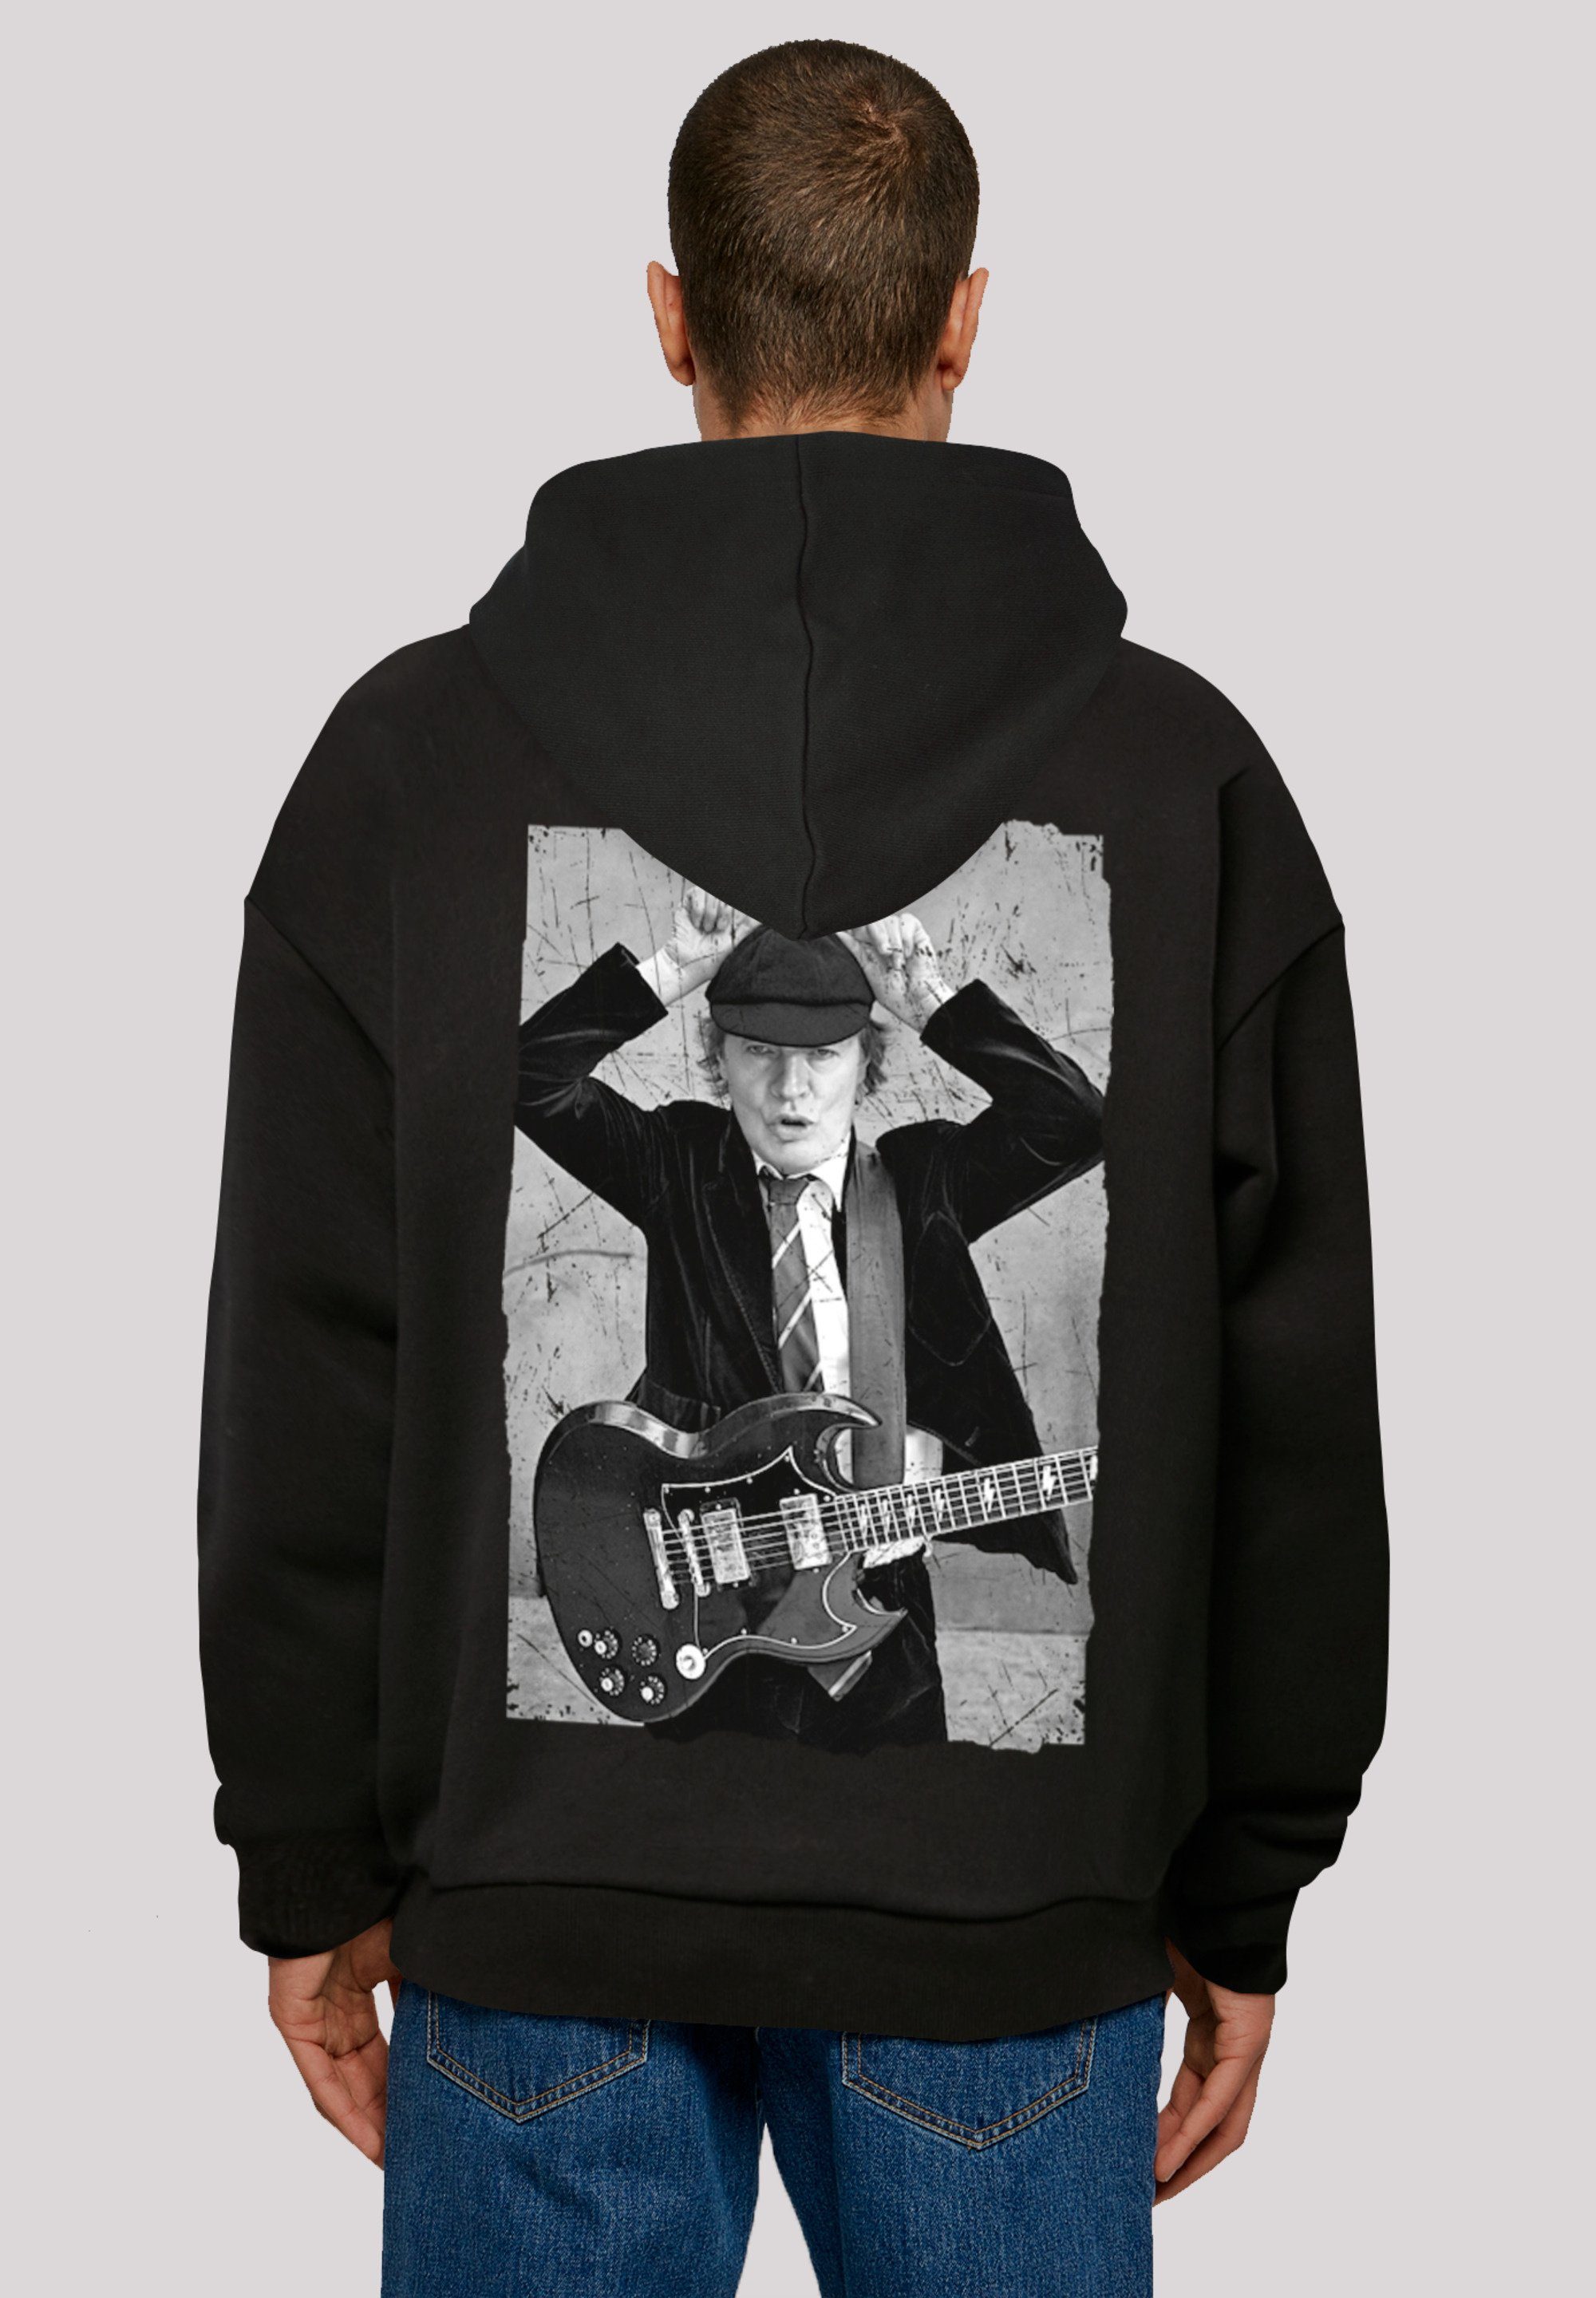 Print F4NT4STIC Kapuzenpullover Hoodie Angus Young ACDC